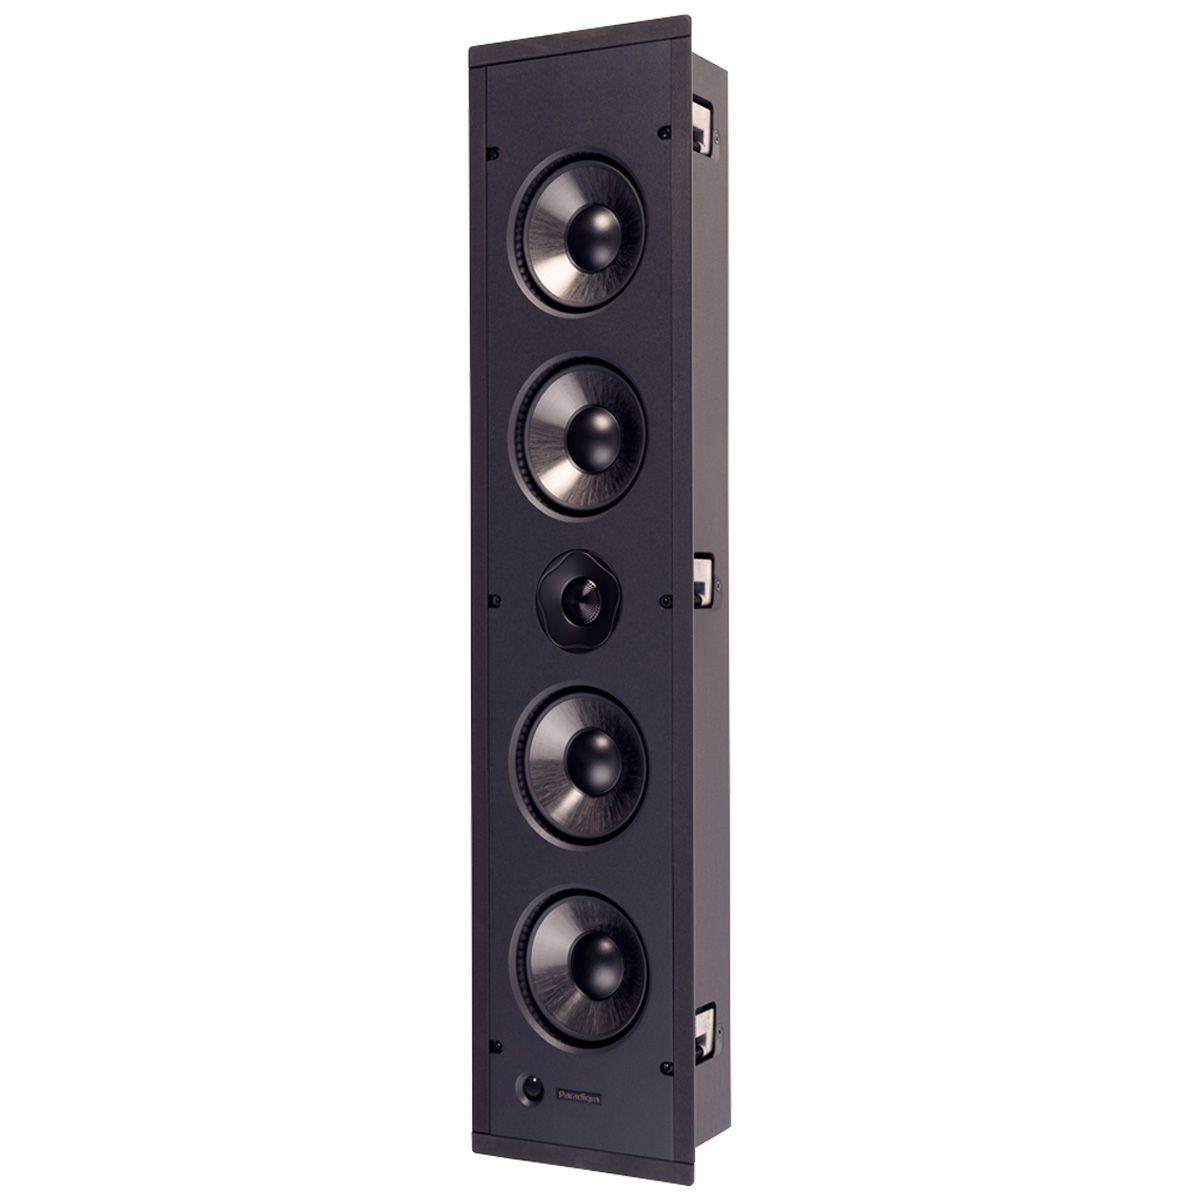 Paradigm CI Pro P3 LCR V2 Loudspeaker angled front view without grille